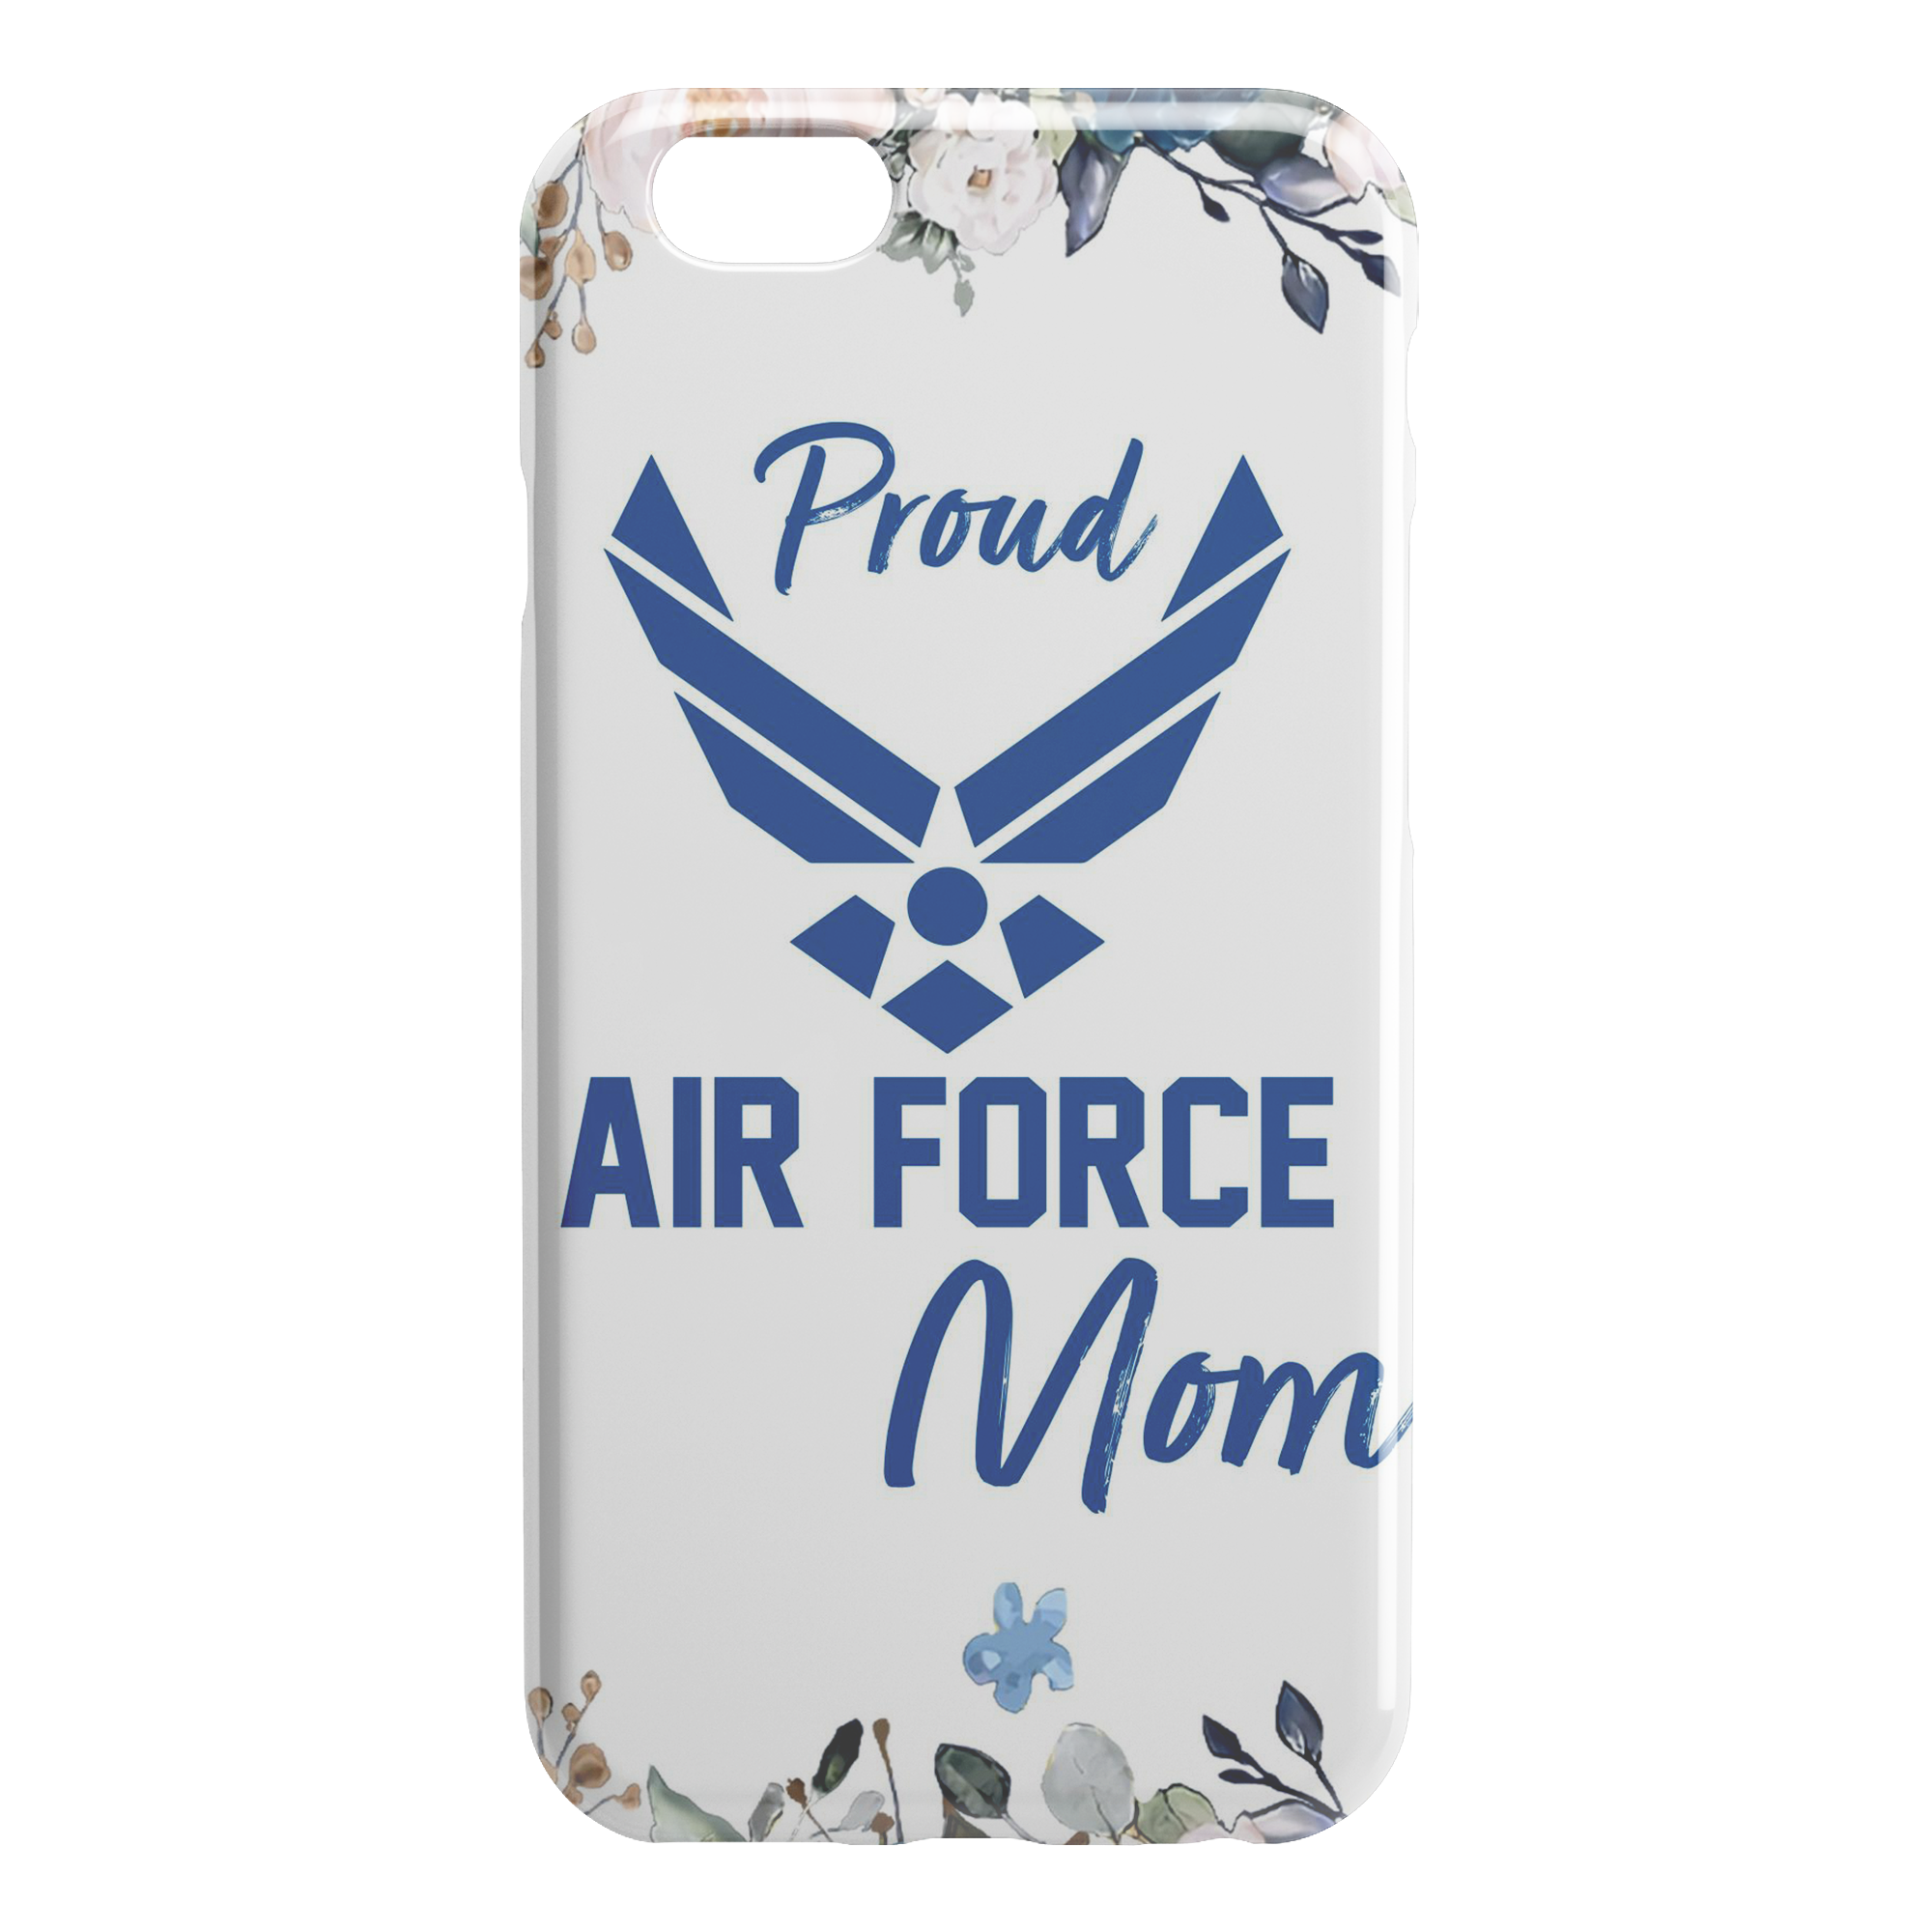 Proud Air Force Mom iPhone cases Military mom gift